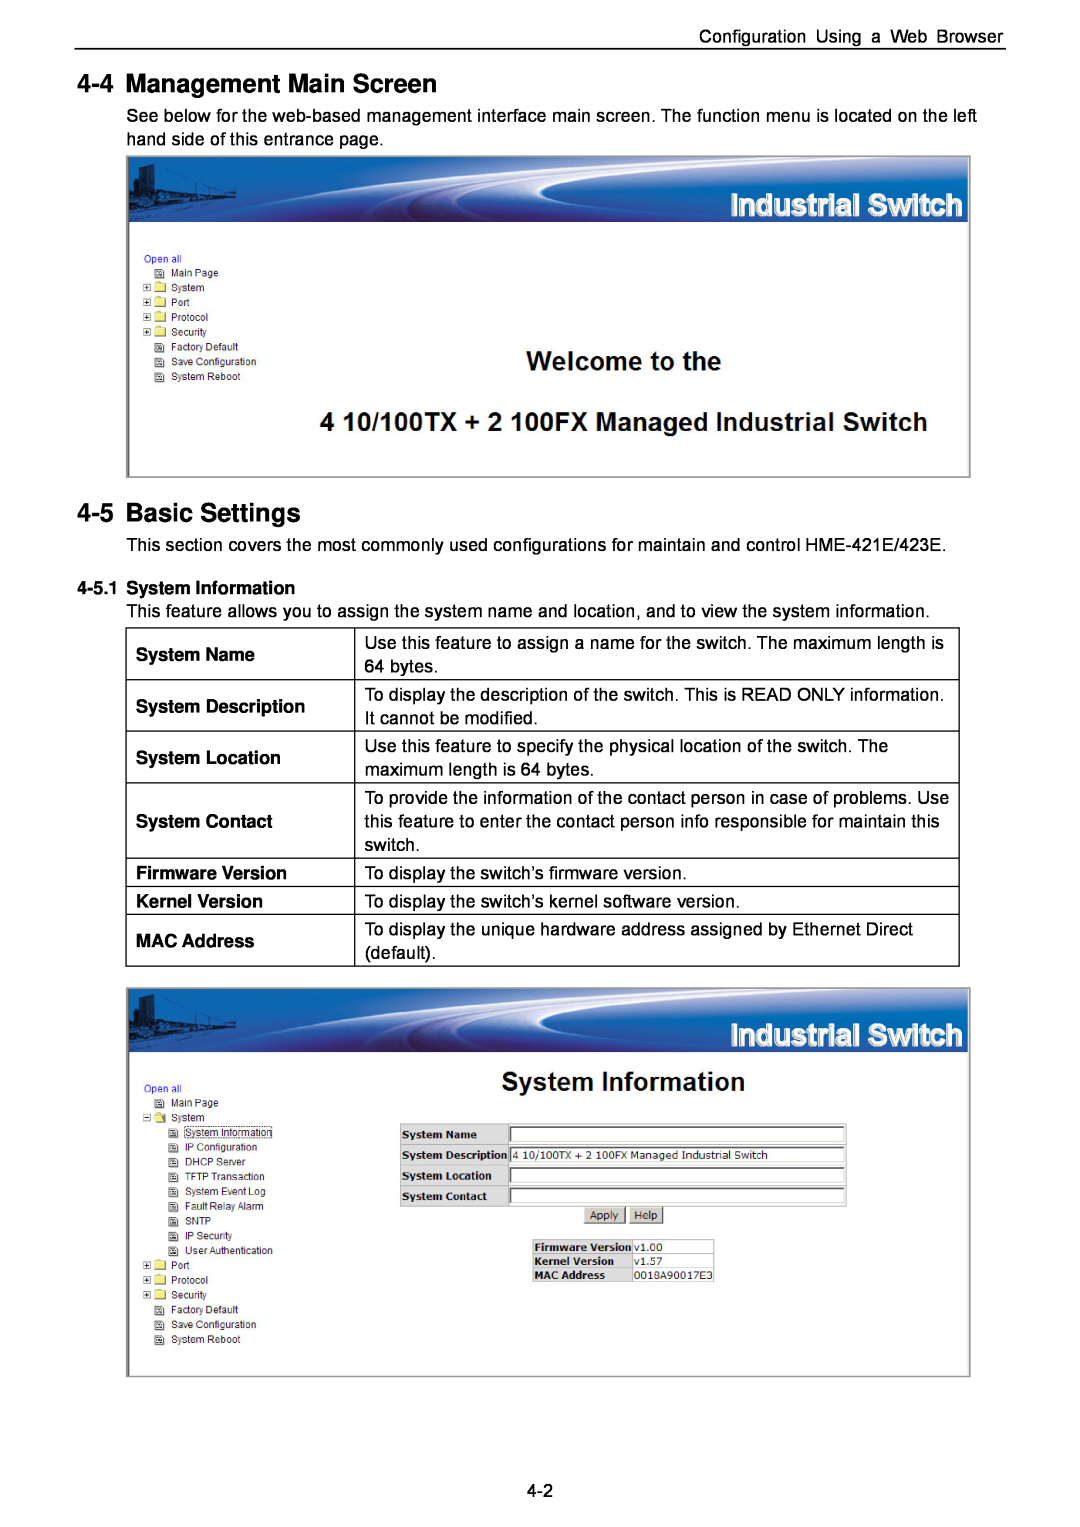 Husky HME-421E Management Main Screen, Basic Settings, System Information, System Name, System Description, System Contact 